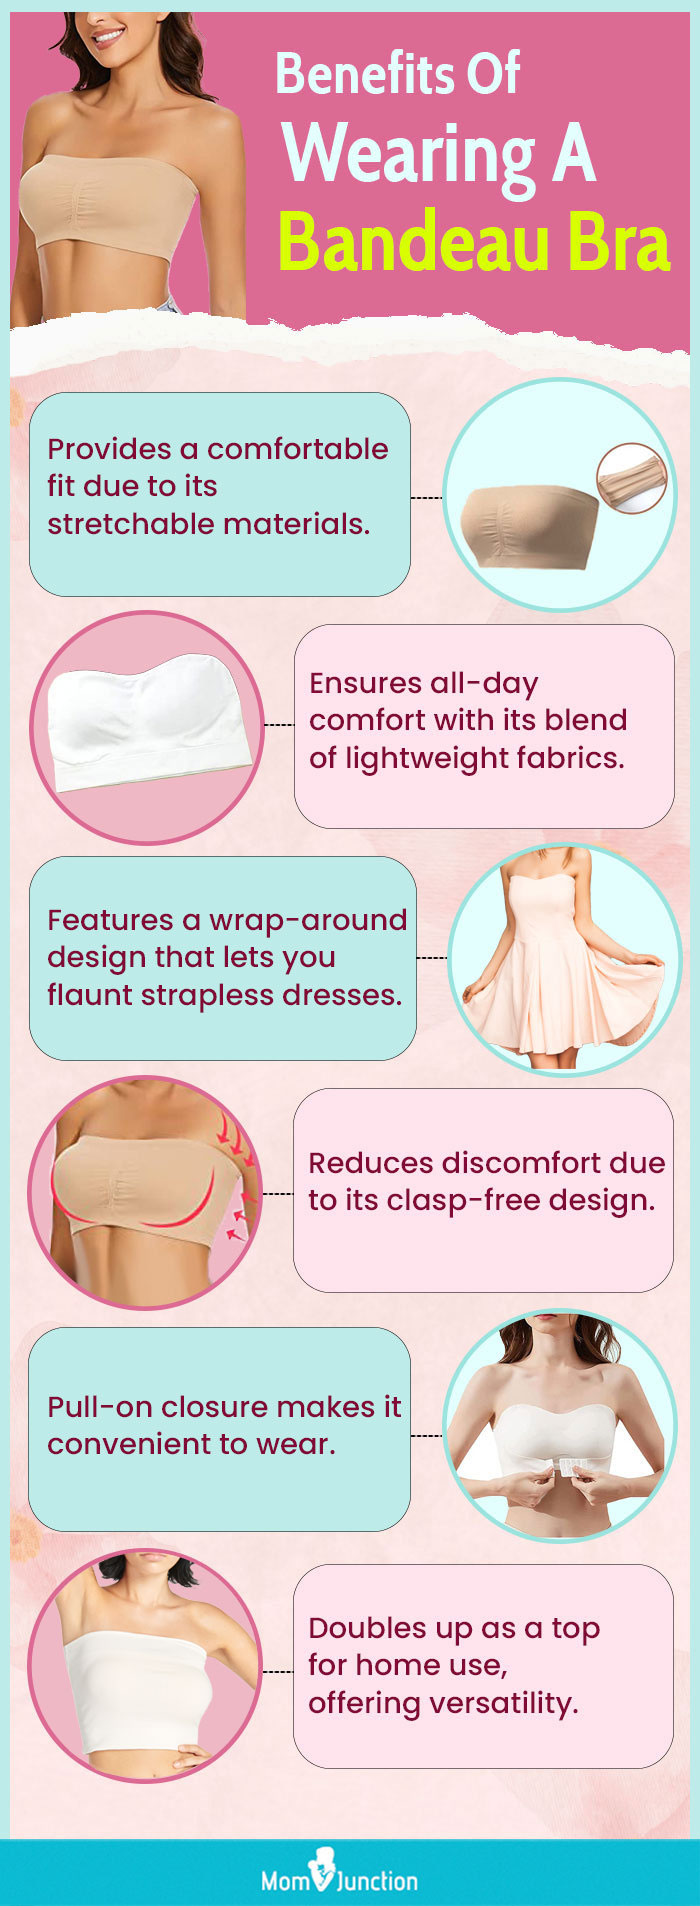 Benefits Of Wearing A Bandeau Bra (infographic)